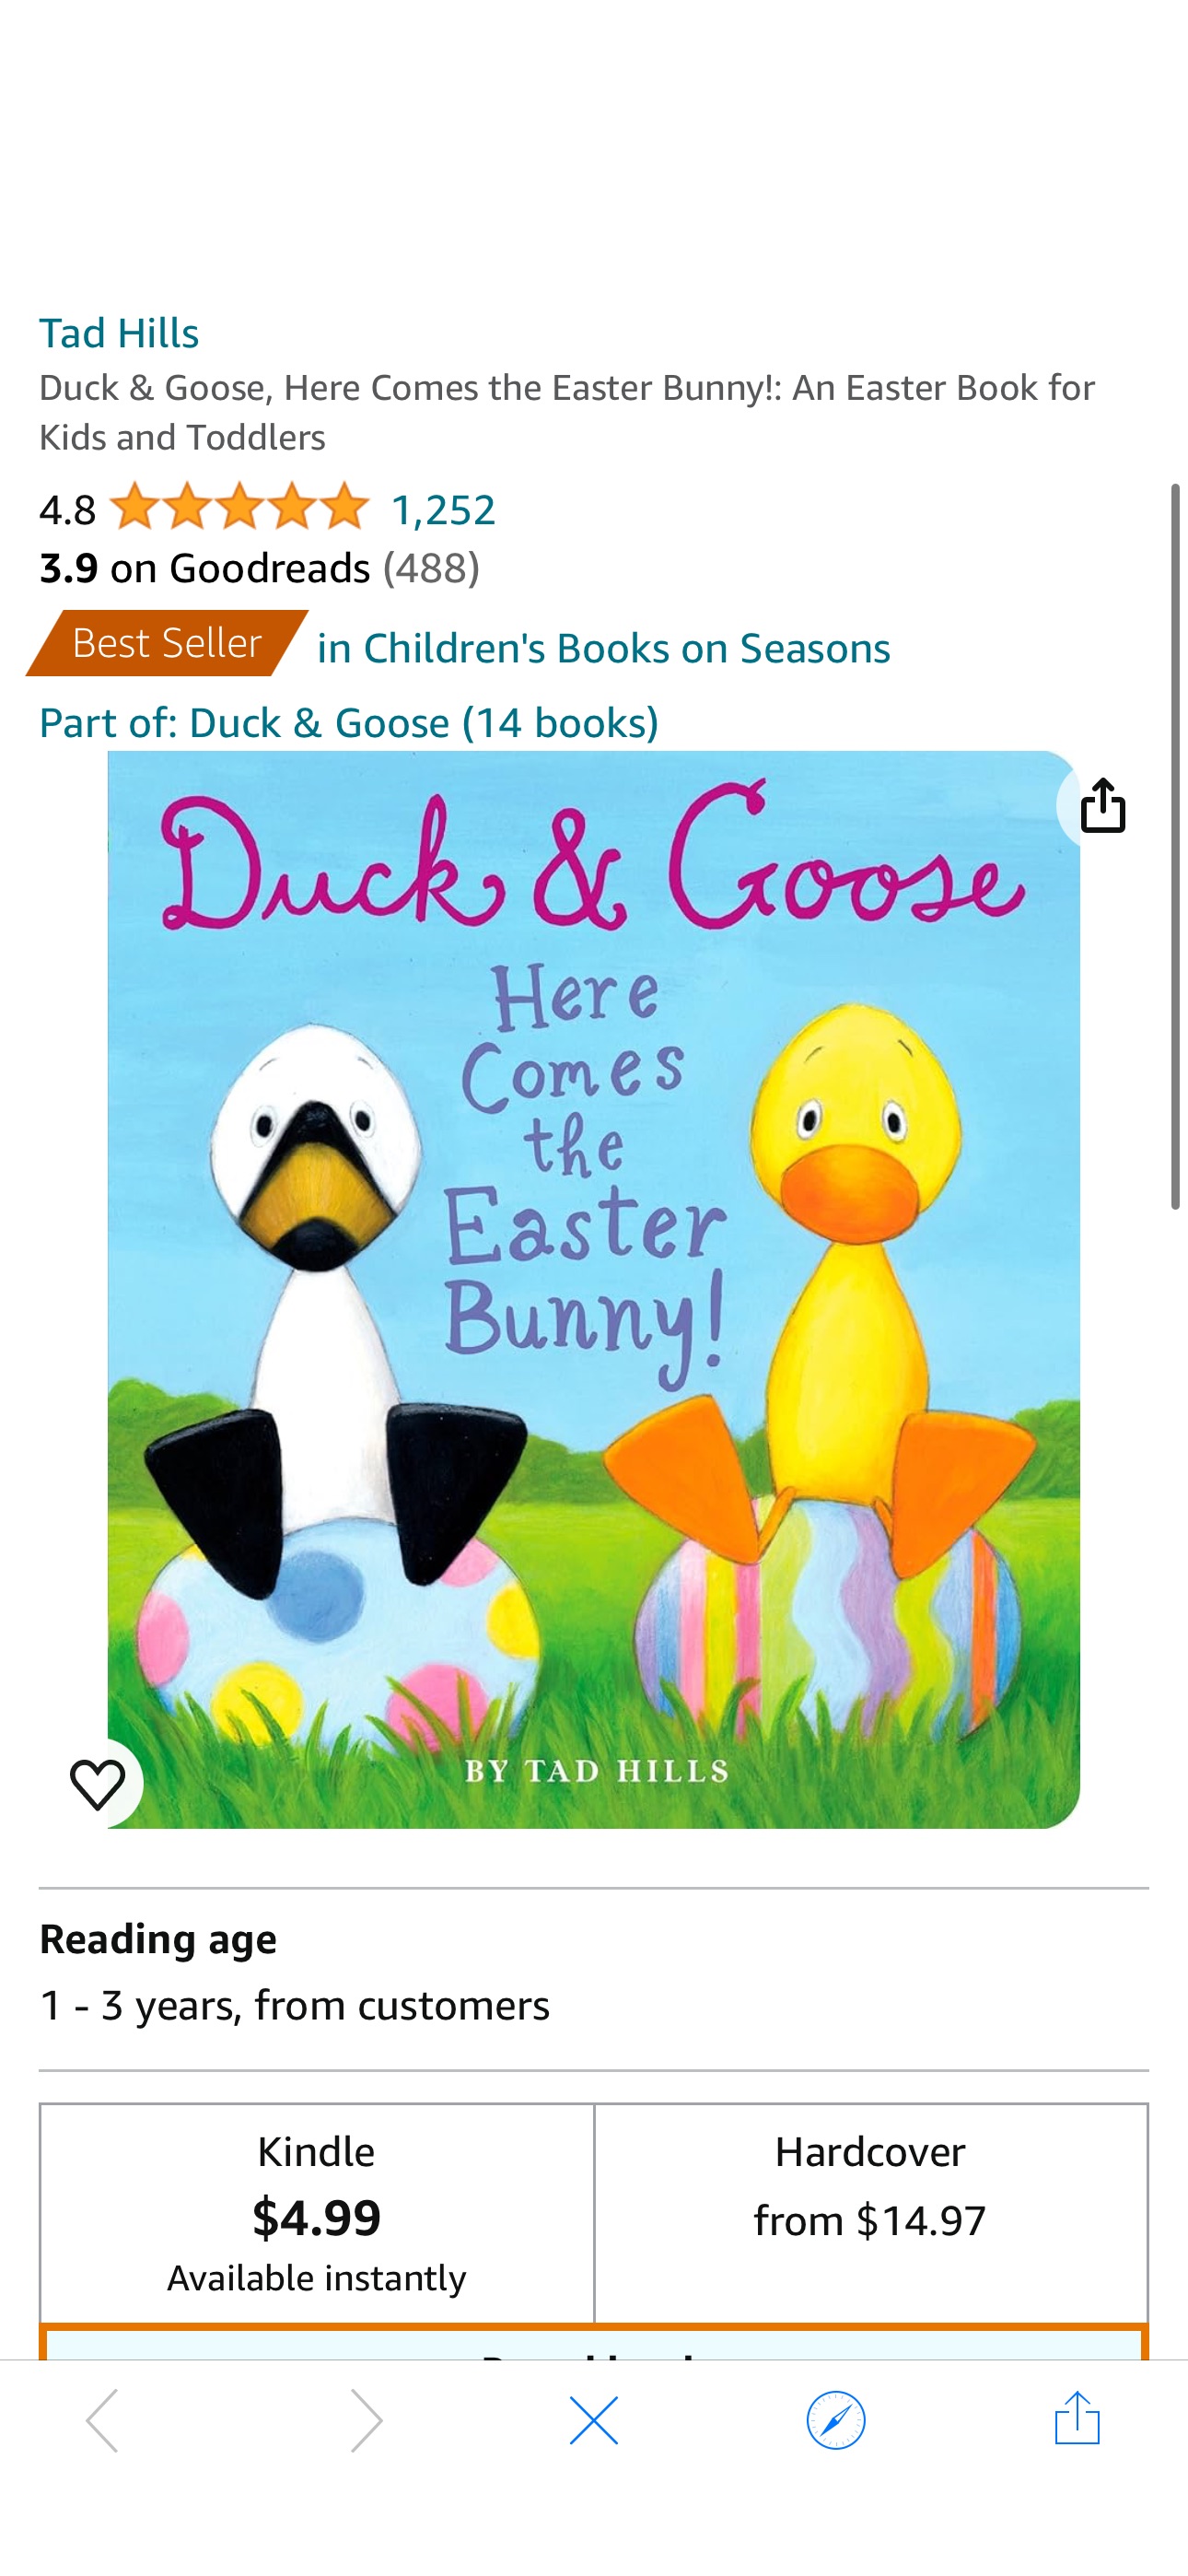 Amazon.com: Duck & Goose, Here Comes the Easter Bunny!: An Easter Book for Kids and Toddlers: 9780375872808: Hills, Tad, Hills, Tad: Books